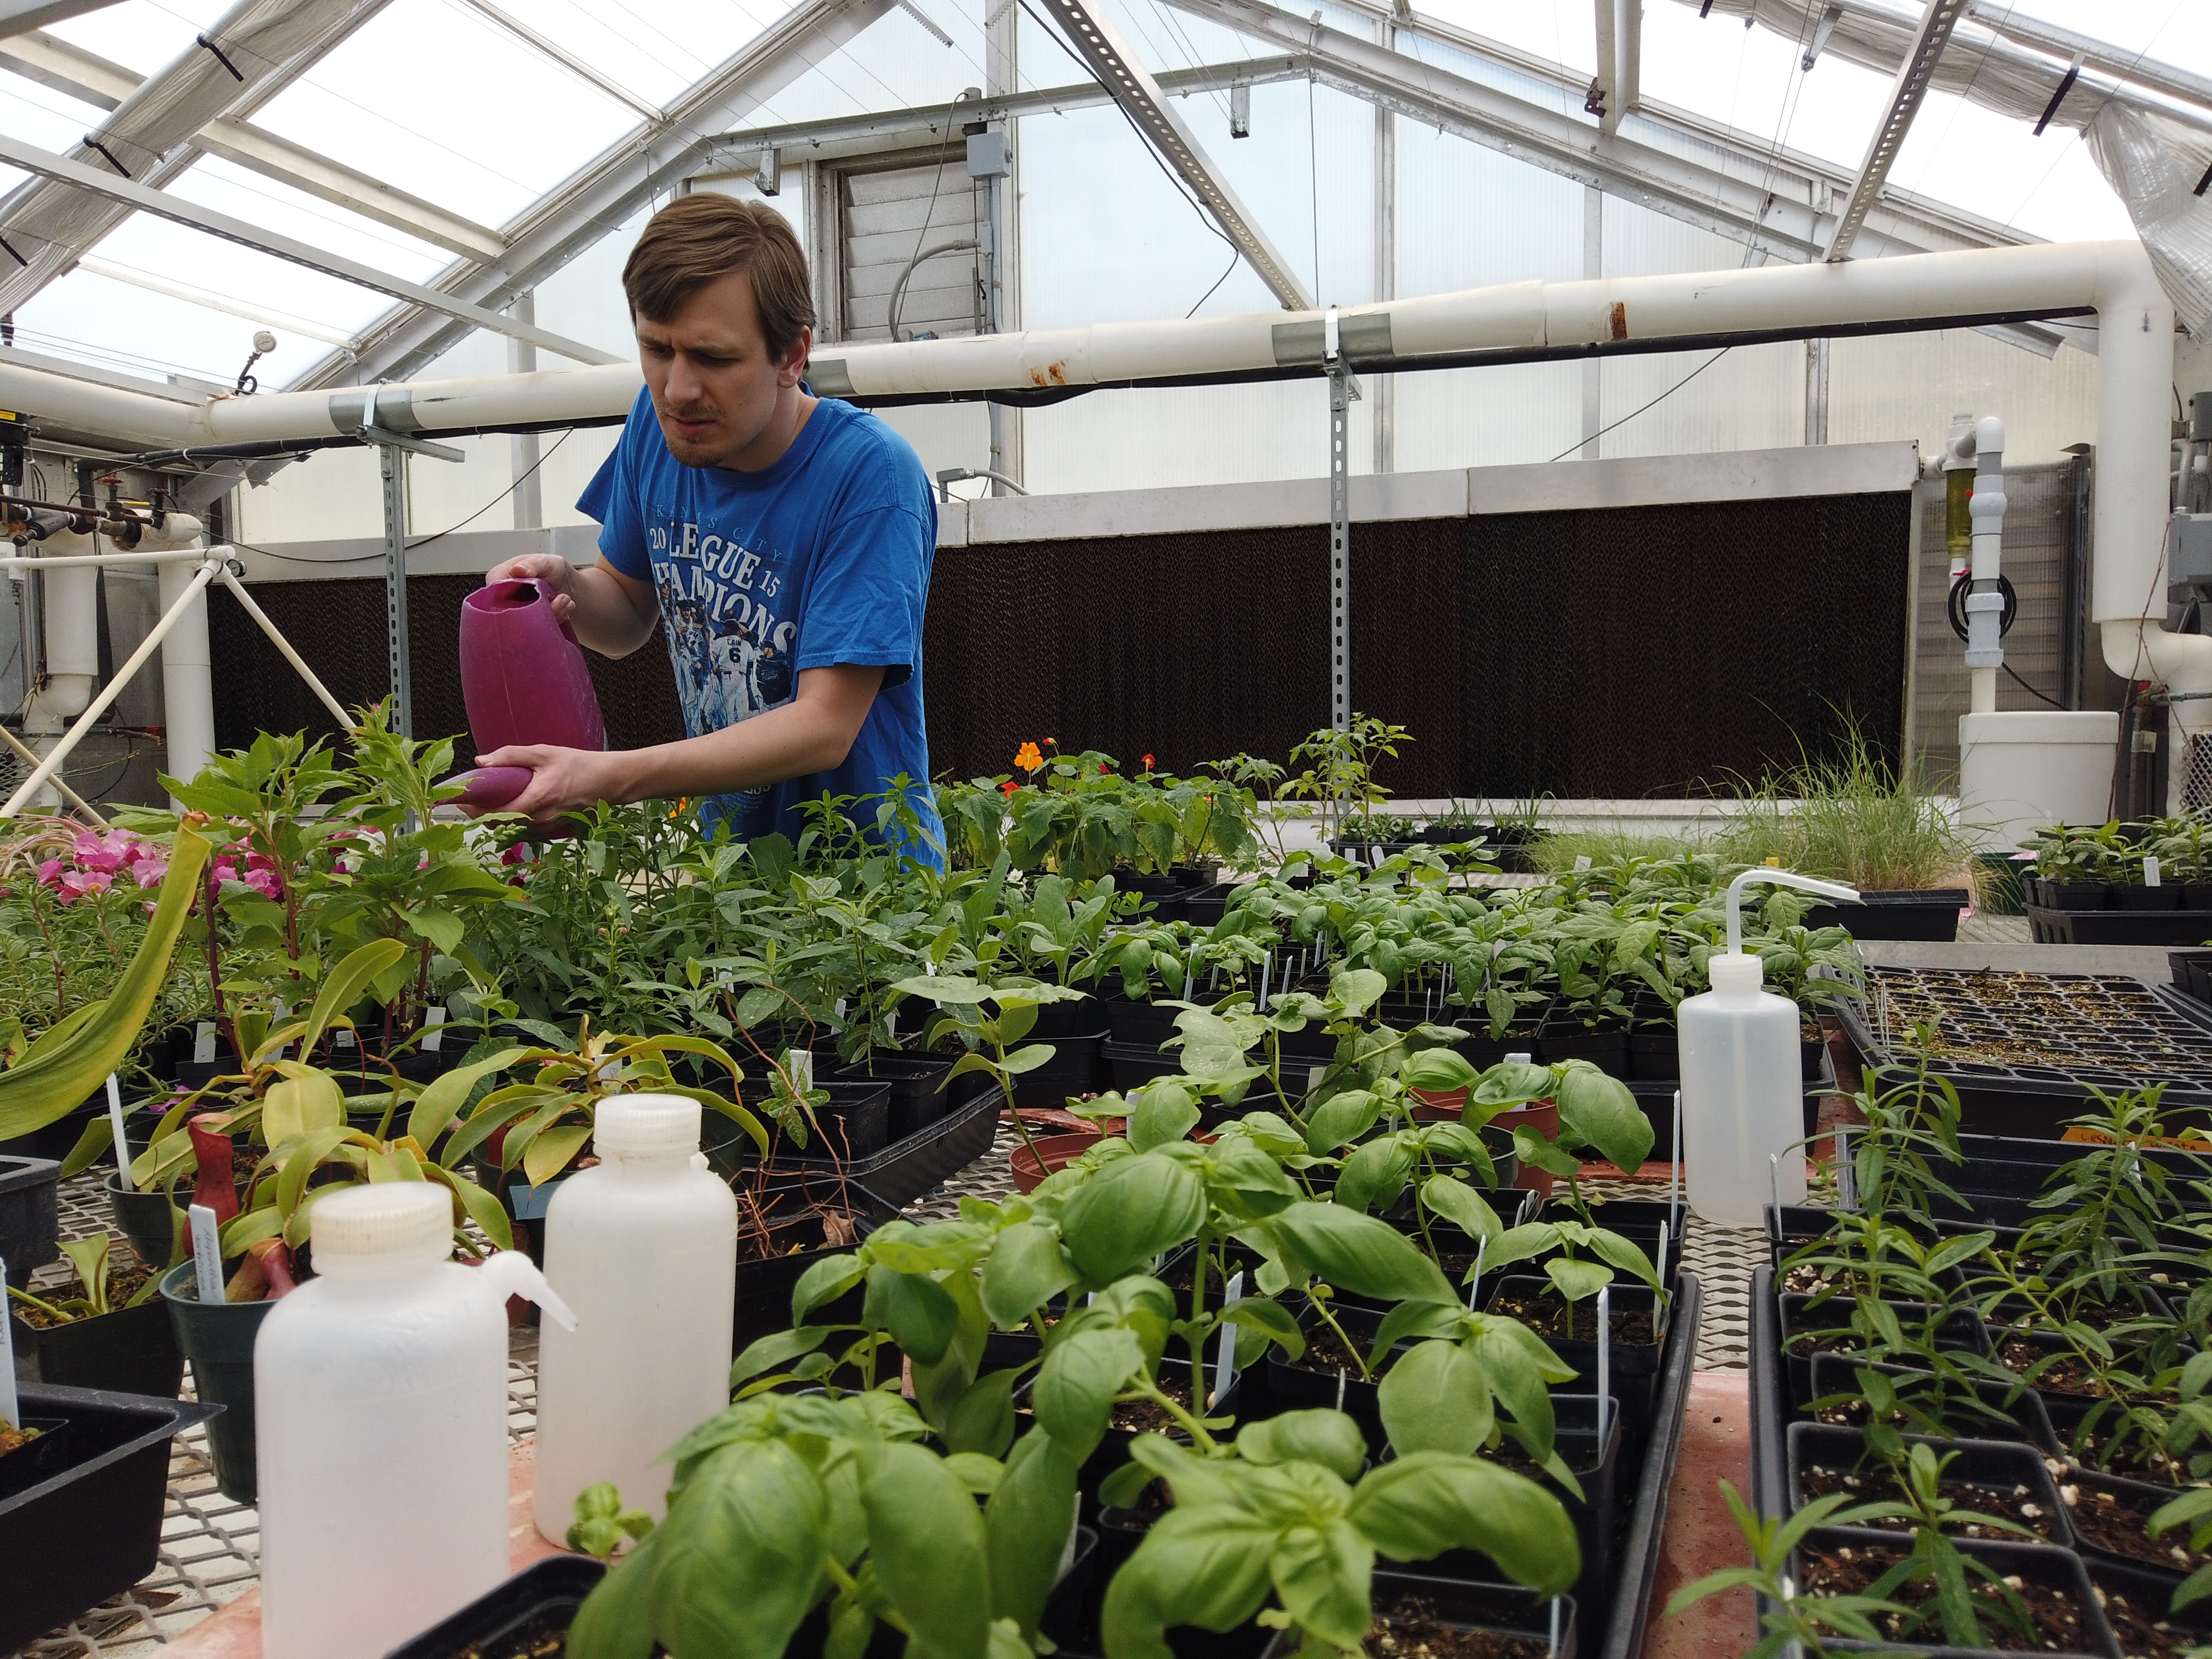 "A man waters plants in a greenhouse as part of work participating in an inclusive postsecondary education program for KU students with intellectual disabilities"